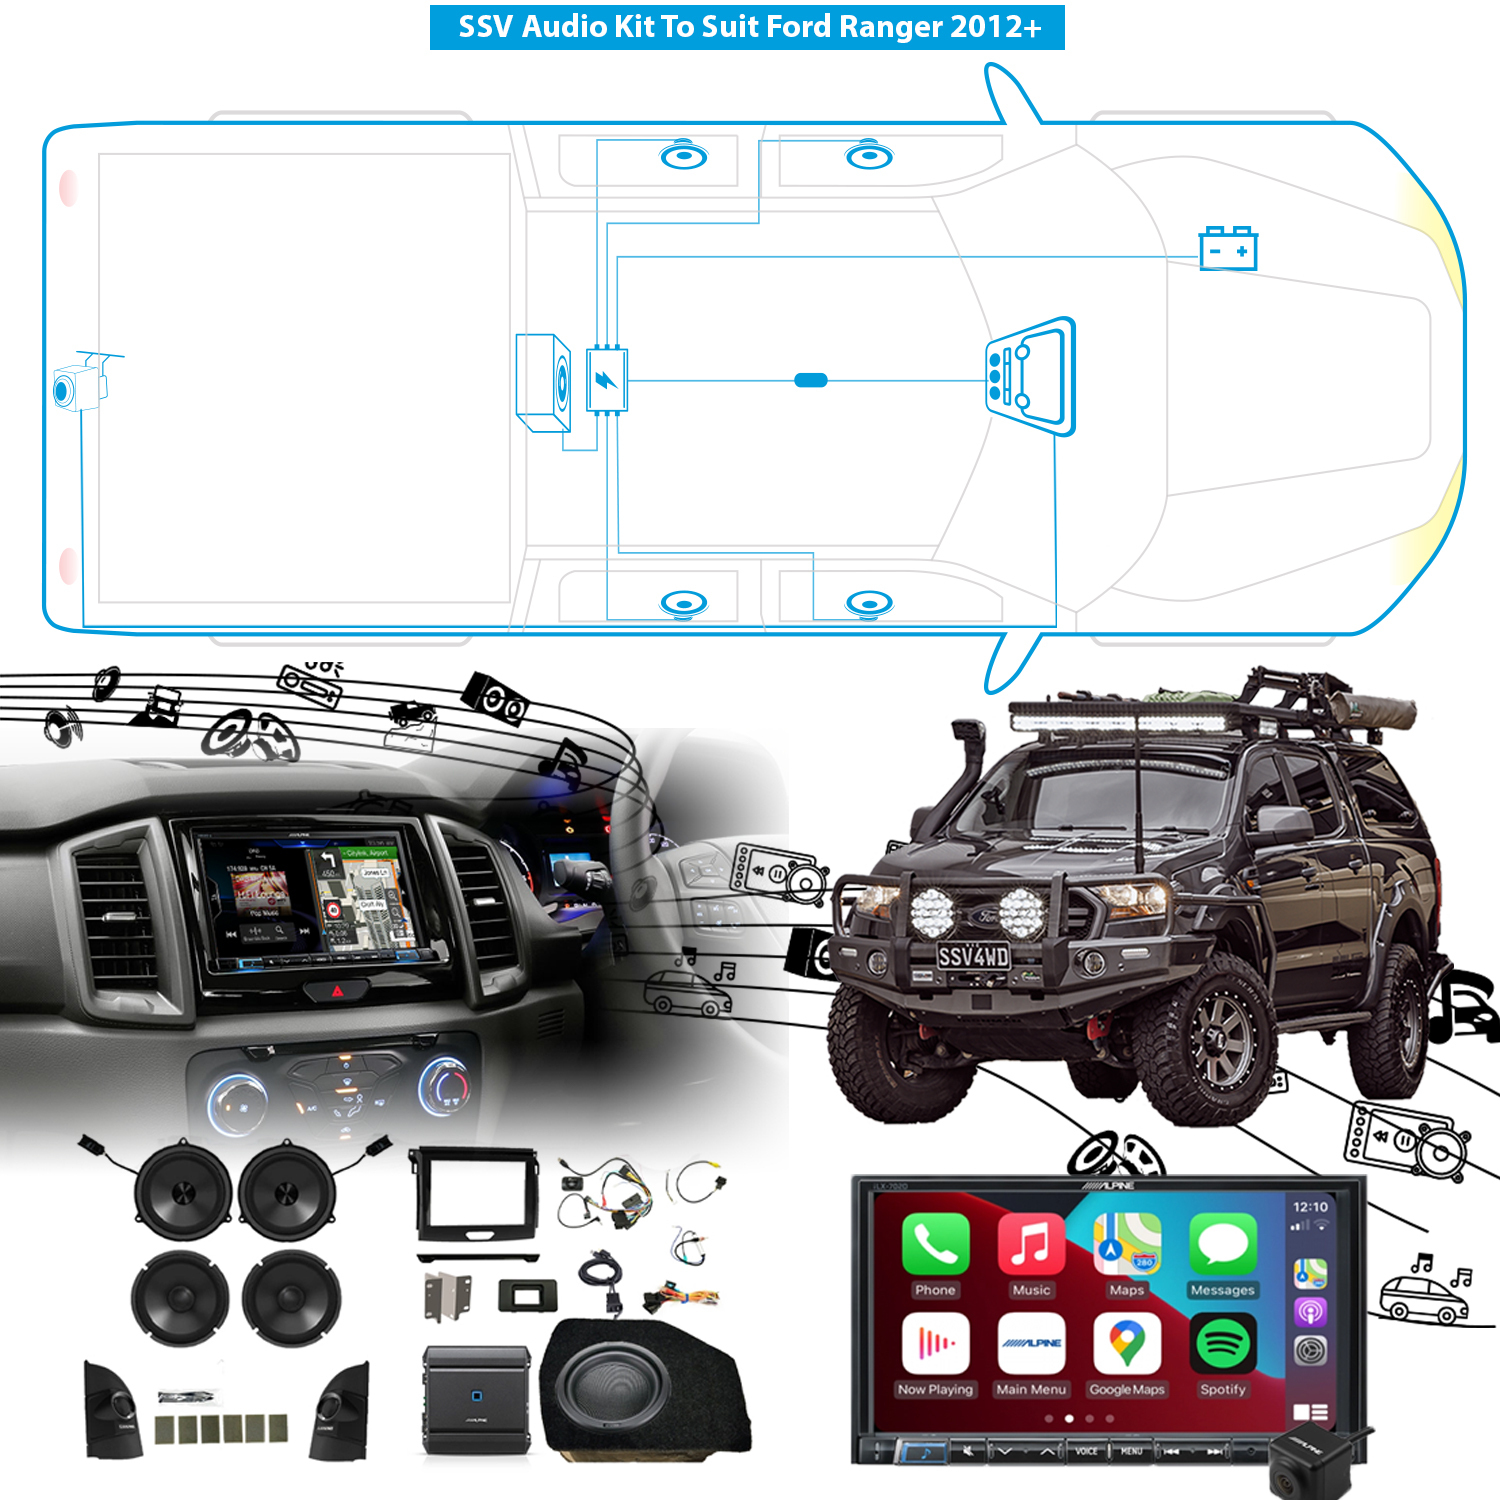 Head Unit, Audio Pack & Accessories Configurator To Suit Ford Ranger 2012+